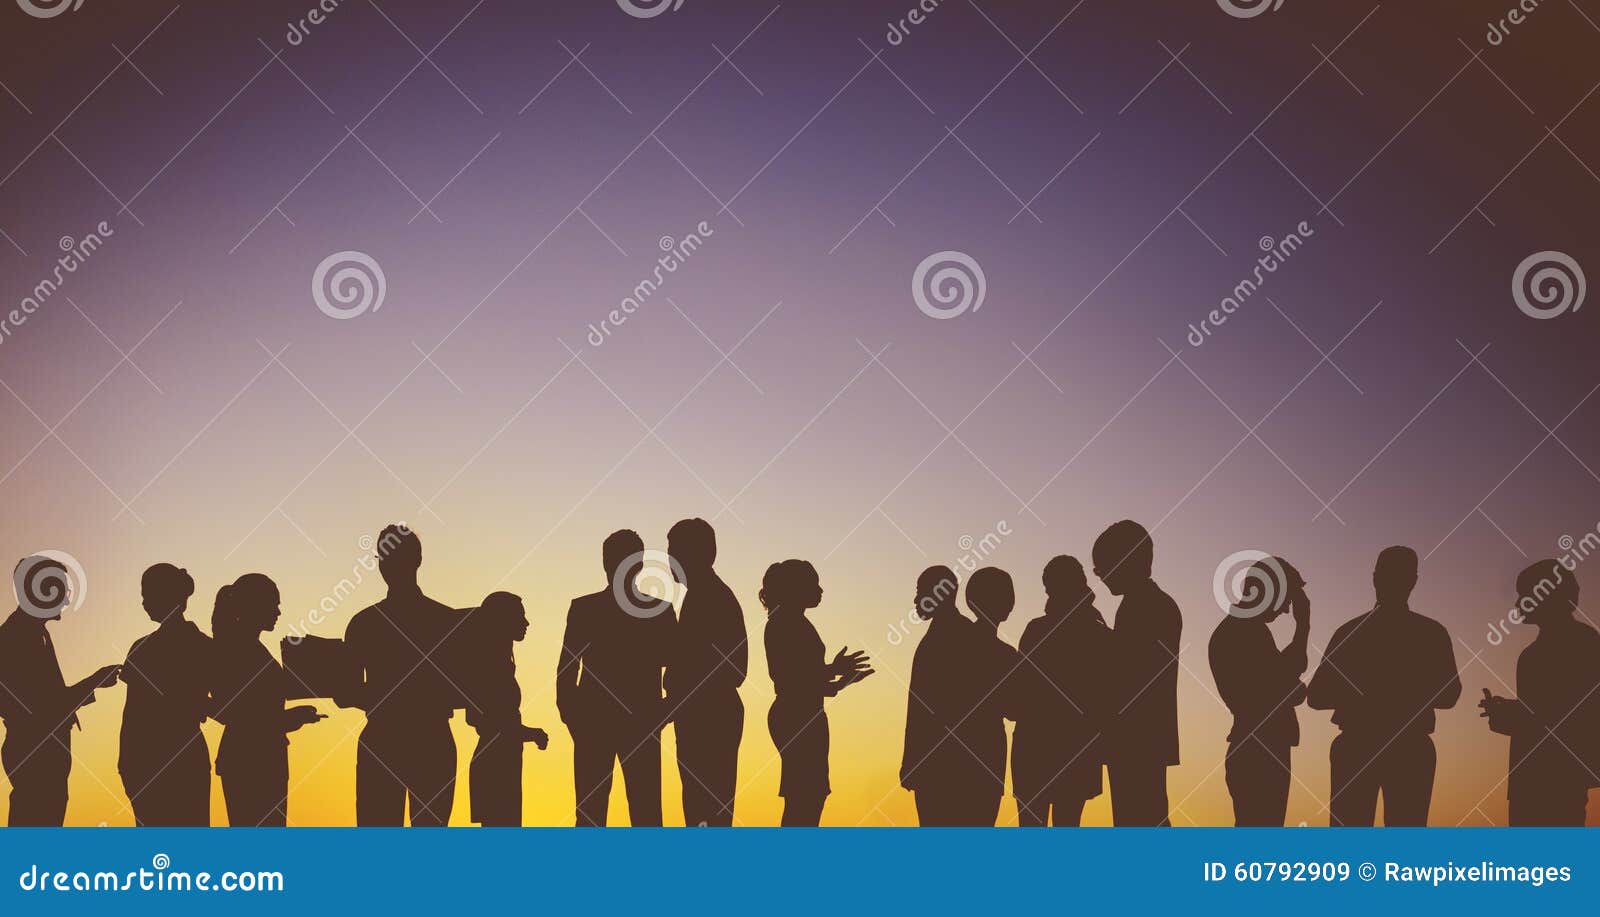 group business people interaction silhouette concept